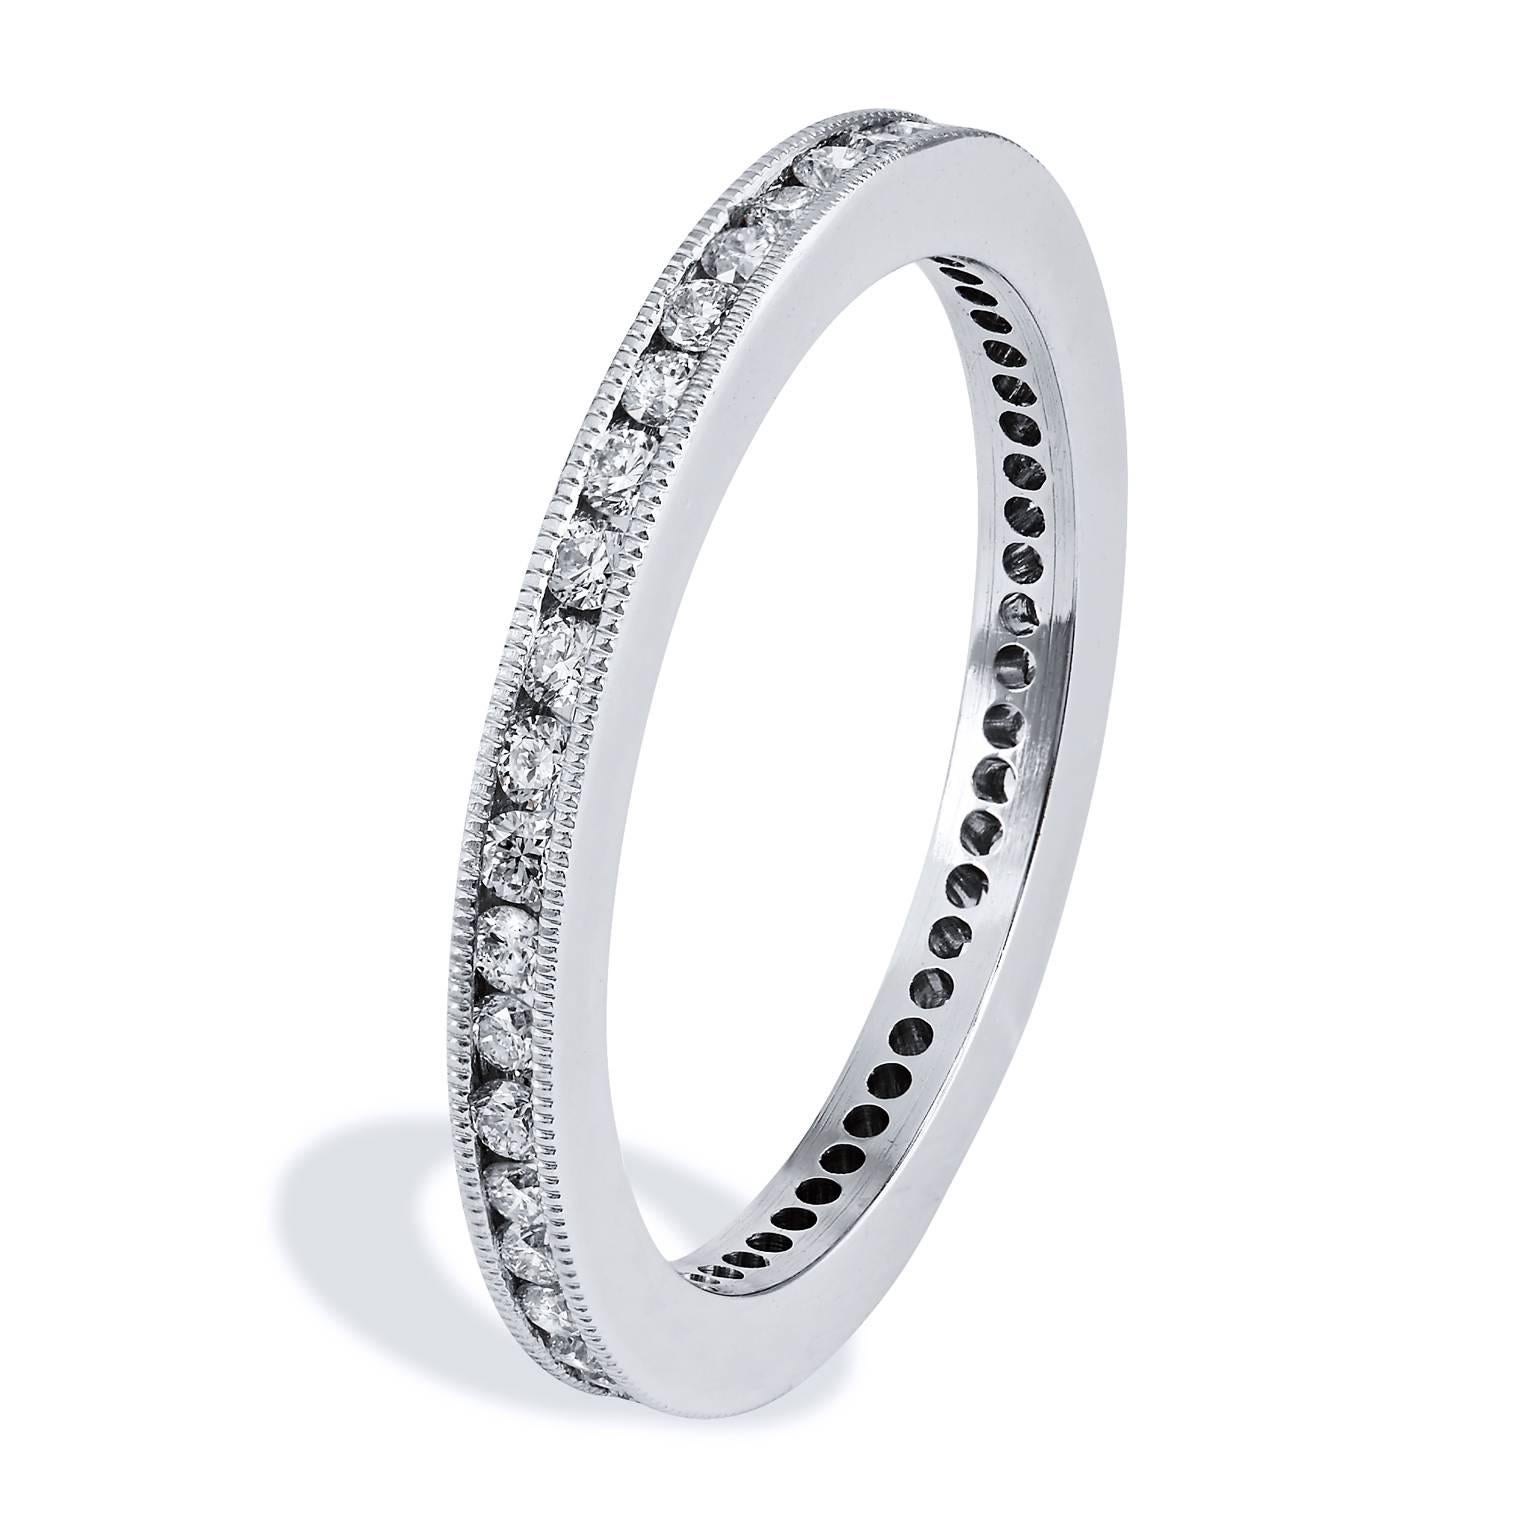  Handmade Brilliant Cut Diamond Platinum Eternity Band Ring

This beautiful platinum eternity band is one of a kind and handmade here at H&H Jewels.  It has forty-three round brilliant cut diamonds, with a total weight of 0.49 carat (G/H/VS).  The